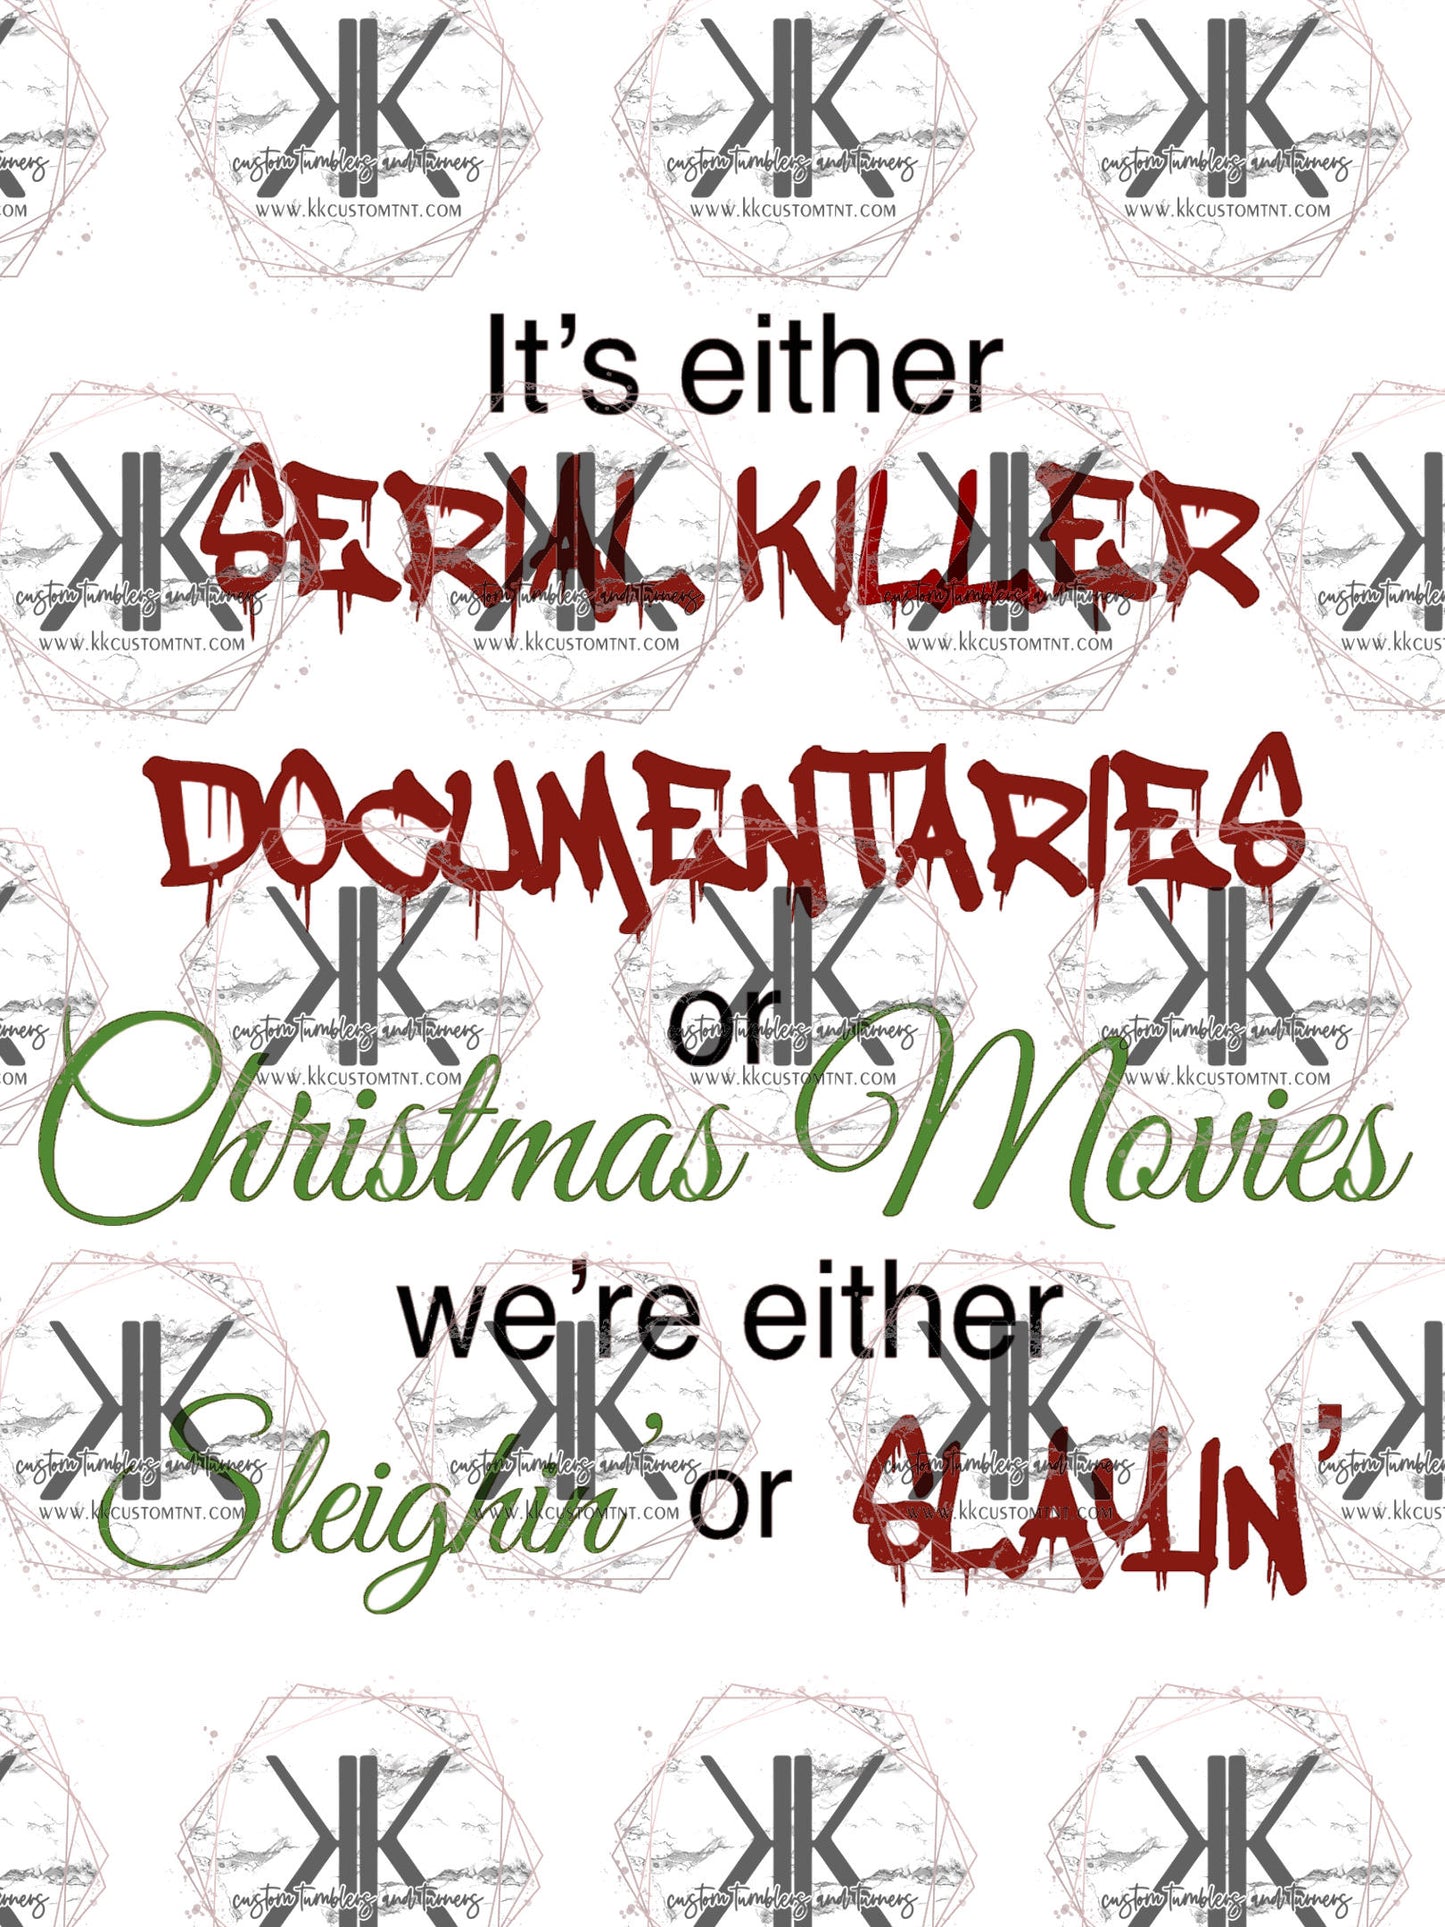 Sleighin' or Slayin' PNG **Digital Download Only**